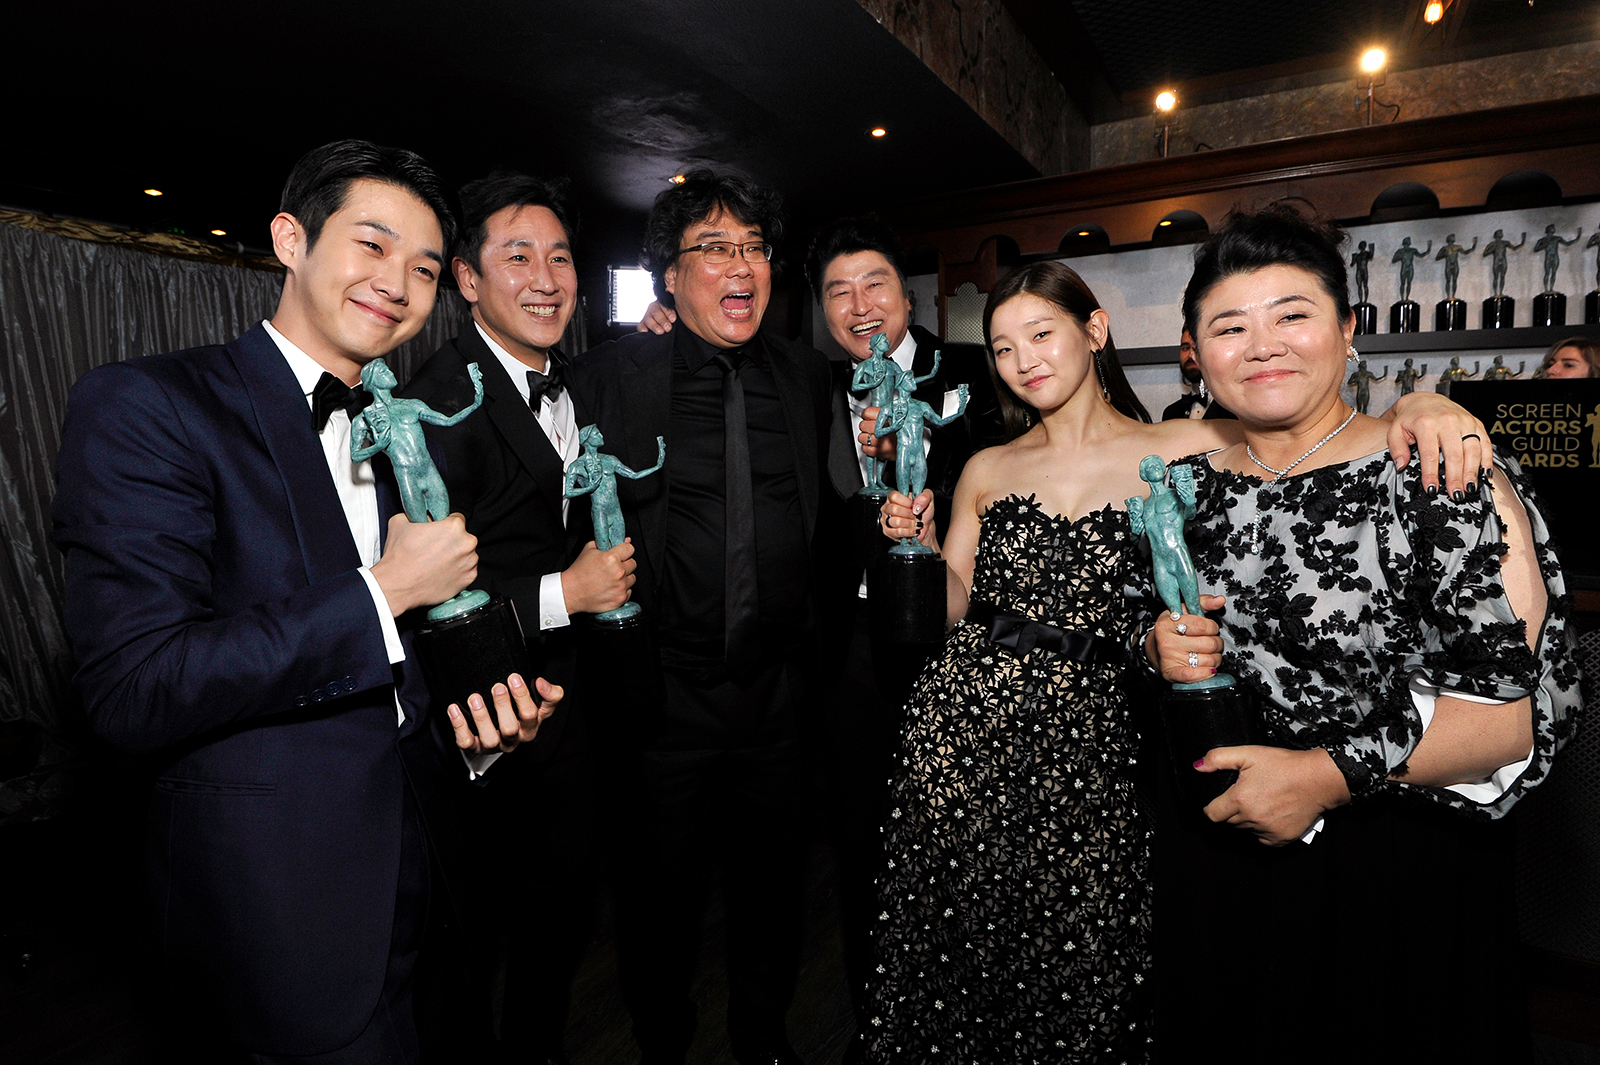 Choi Woo-shik, Lee Sun Gyun, Bong Joon-ho, Song Kang Ho, Park So-dam, and Jeong-eun Lee winners of Outstanding Performance by a Cast in a Motion Picture for 'Parasite', pose in the trophy room during the 26th Annual Screen Actors Guild Awards at The Shrine Auditorium on January 19, 2020 in Los Angeles.